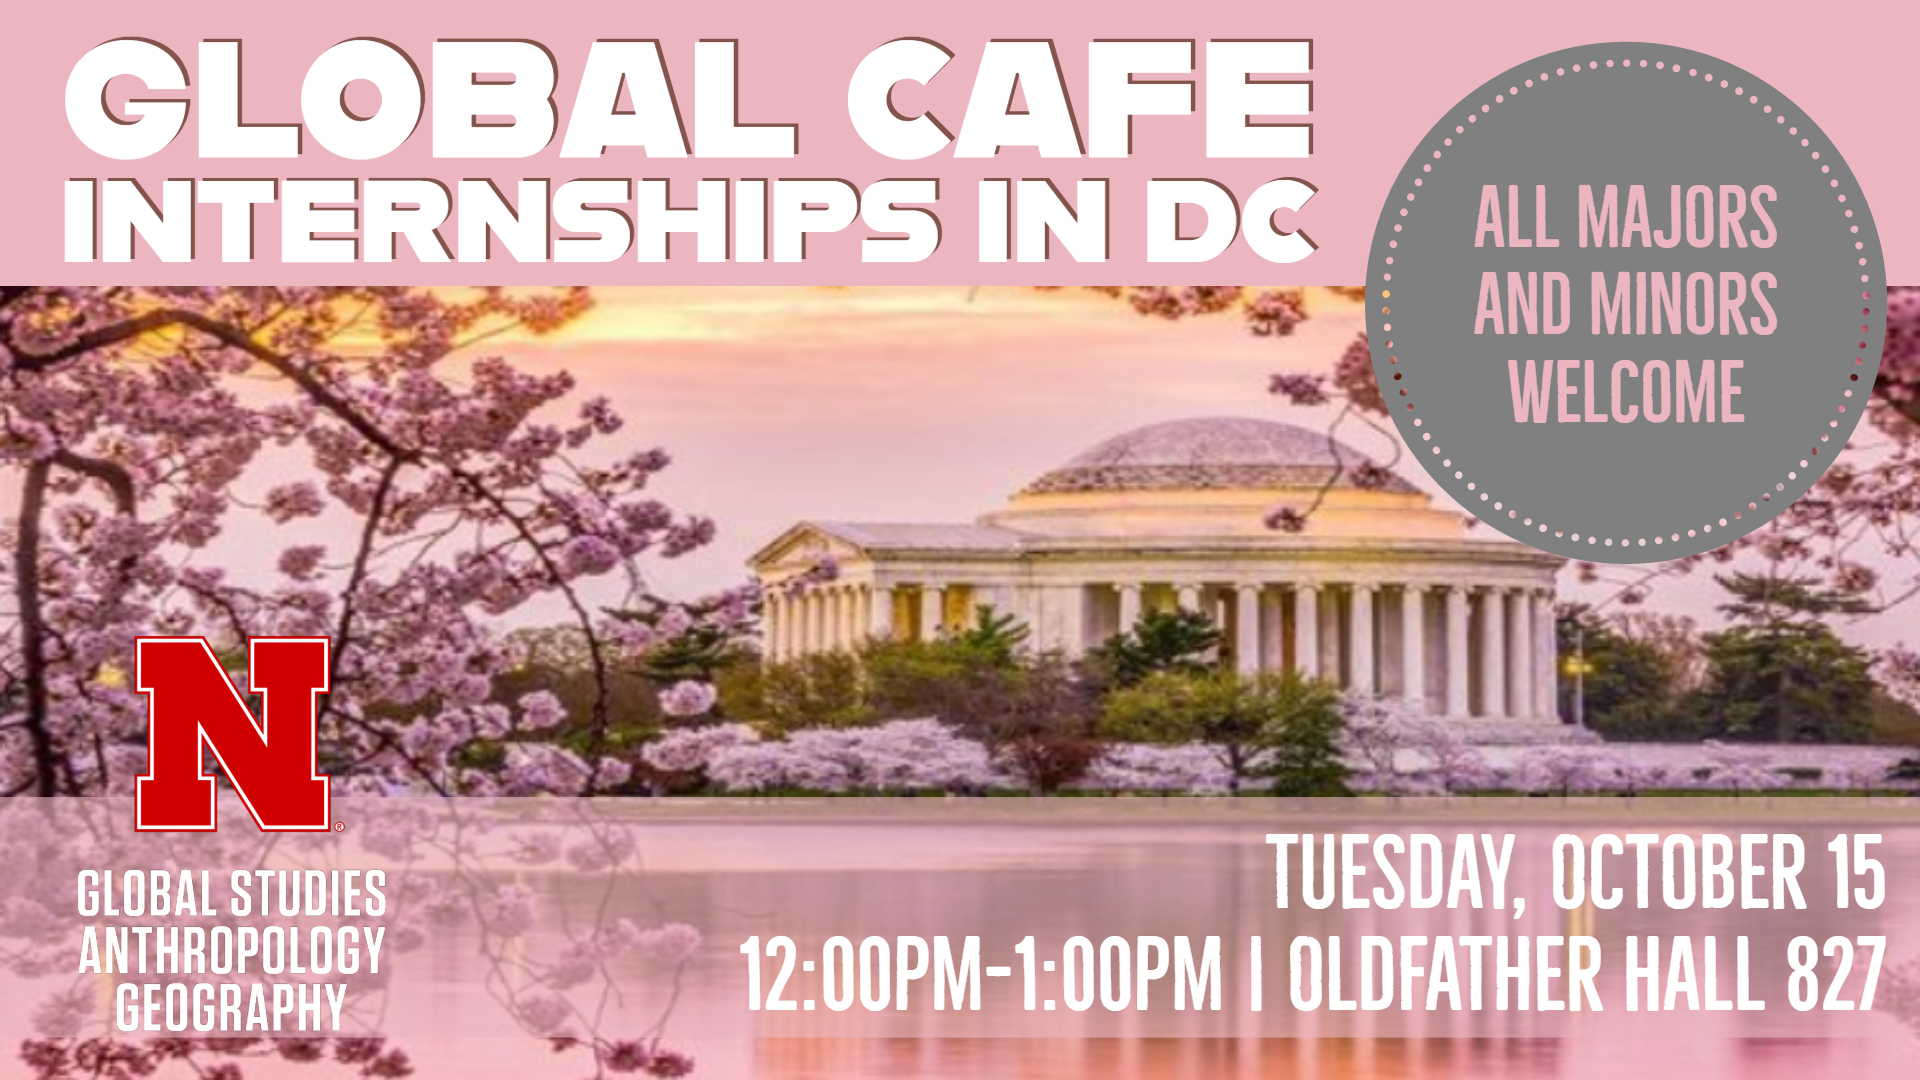 Global Cafe Internships in DC TOMORROW Announce University of